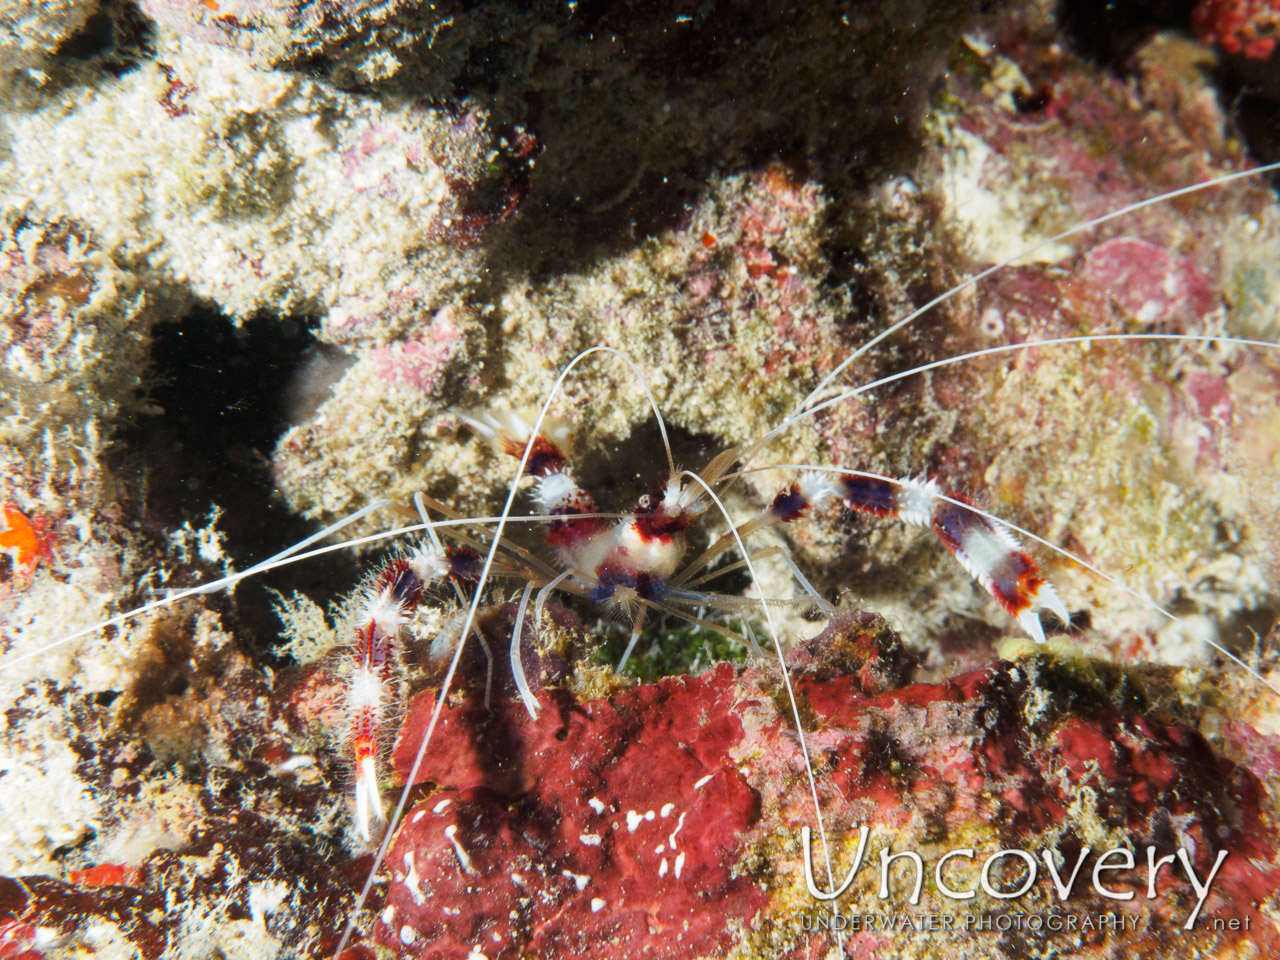 Banded Coral Shrimp (stenopus Hispidus), photo taken in Maldives, Male Atoll, South Male Atoll, South Reef Out